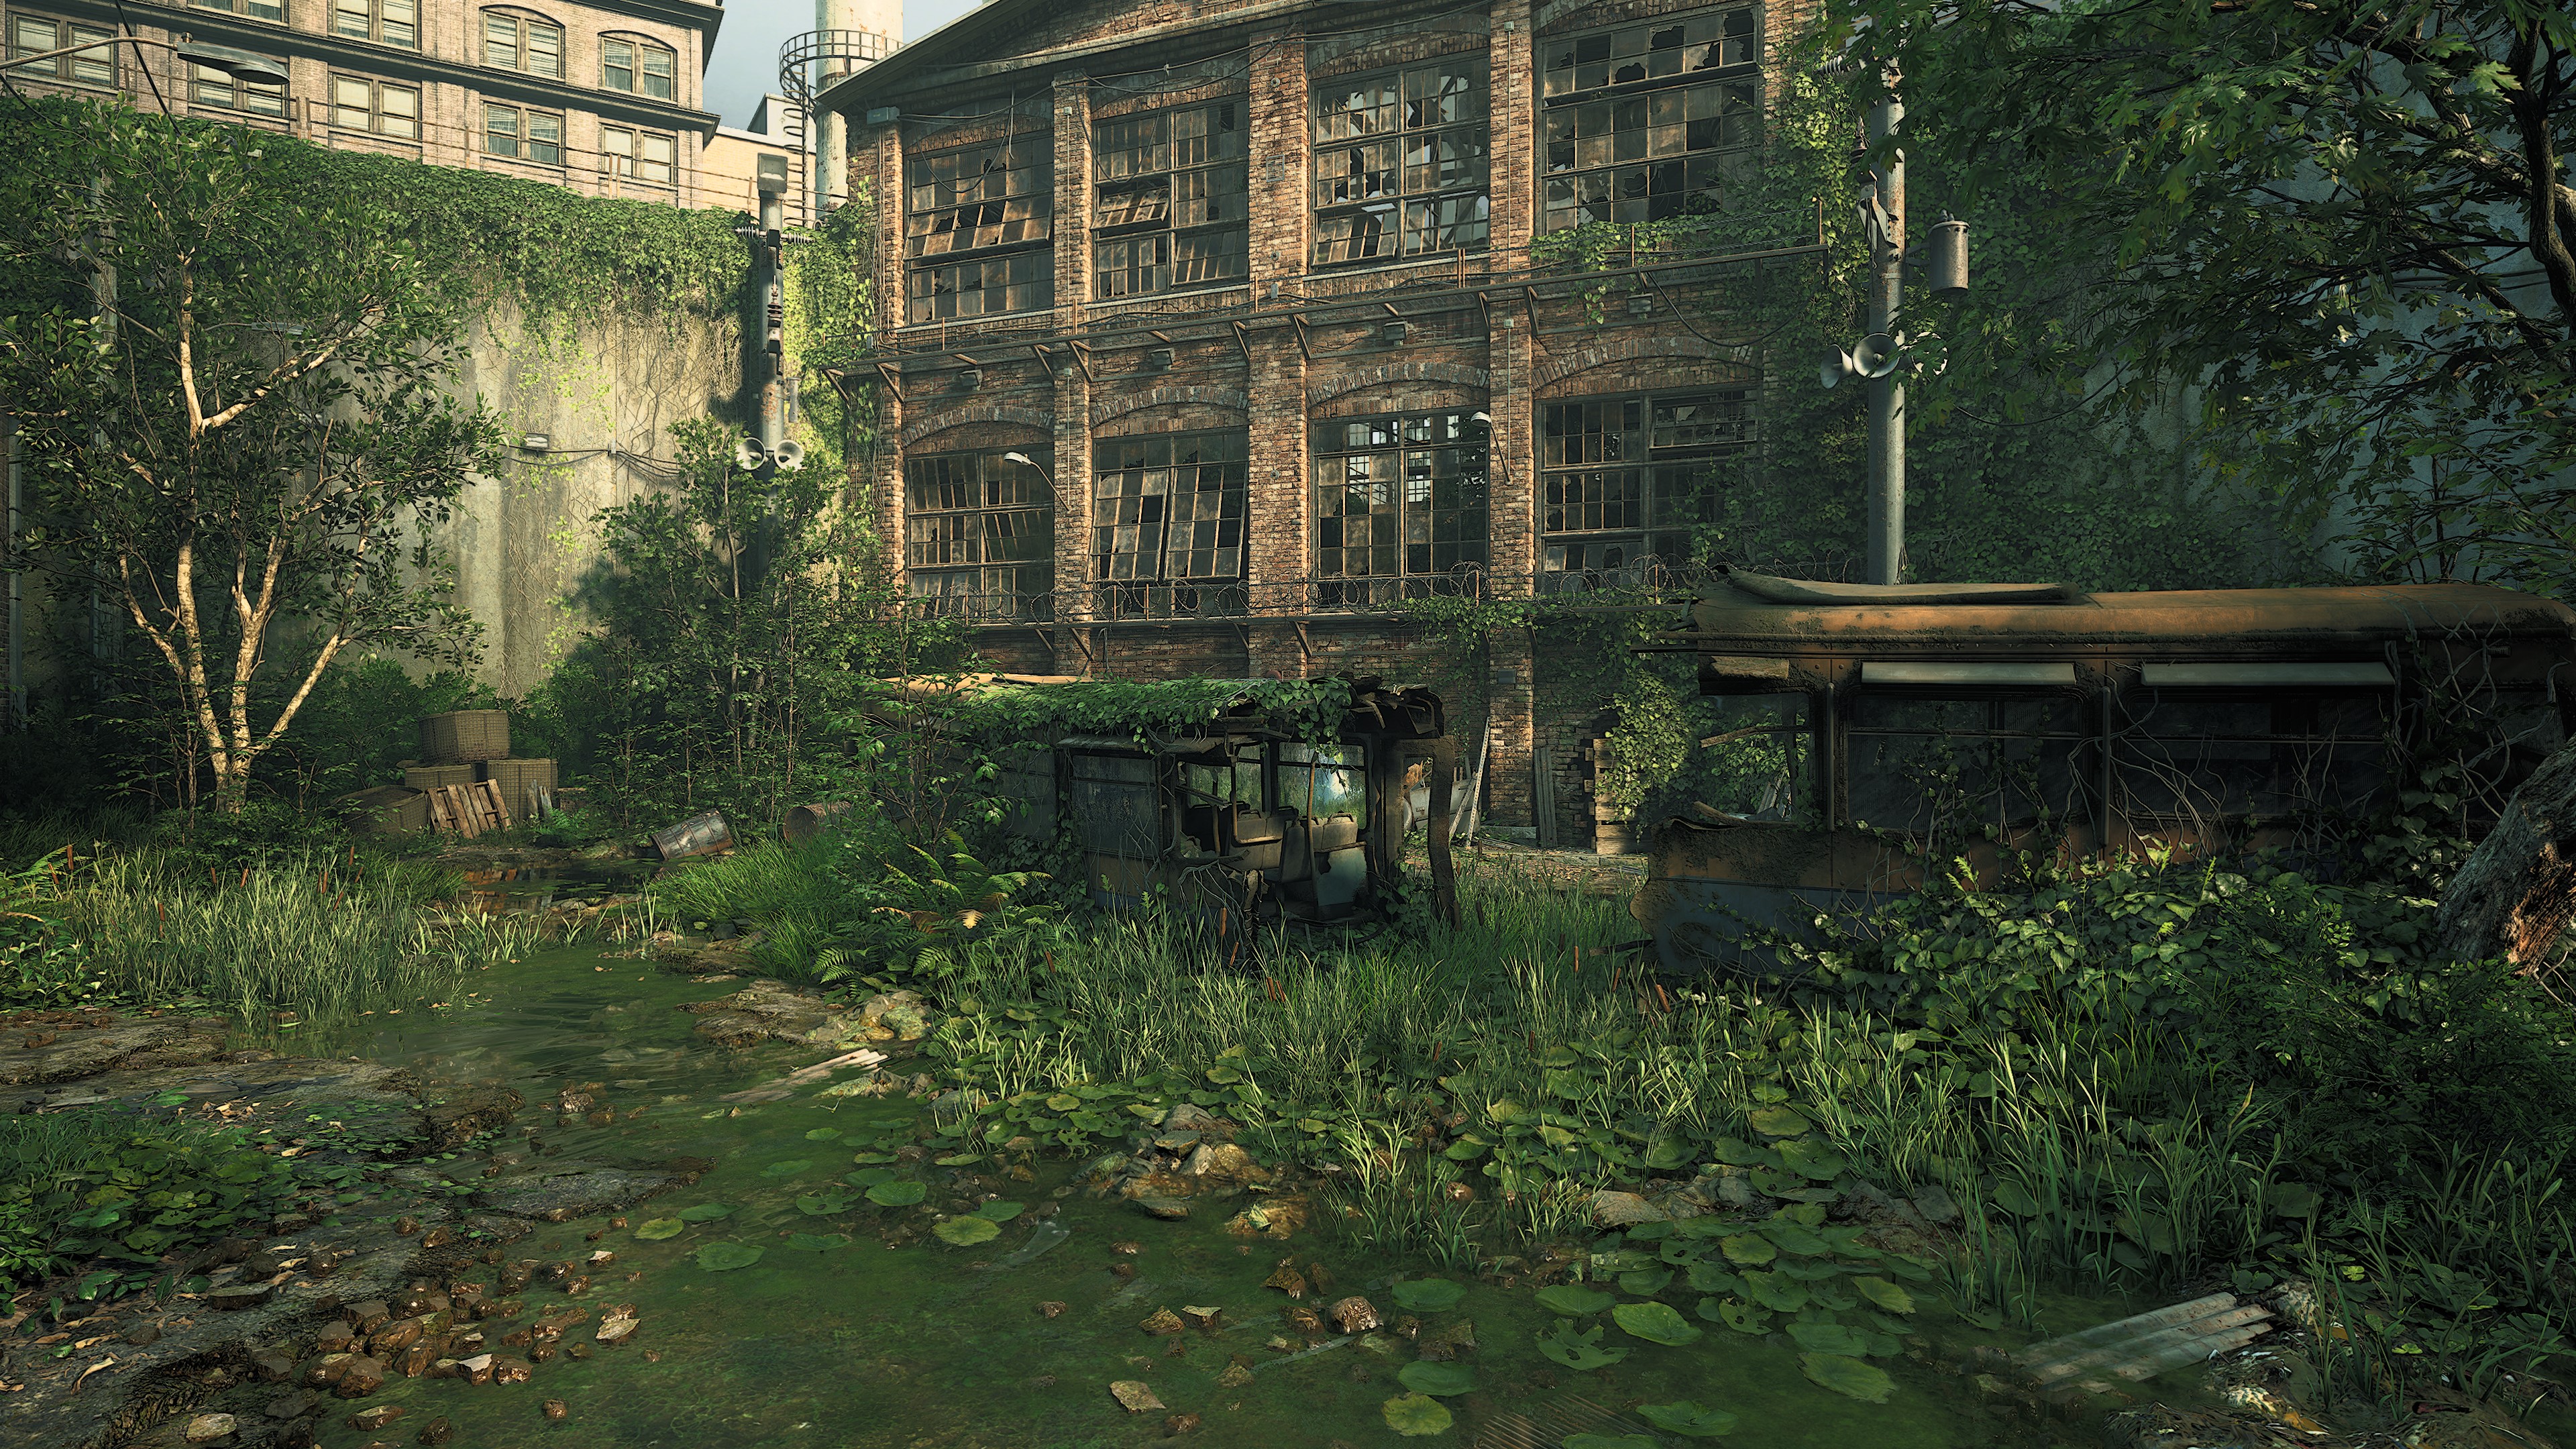 The Last Of Us PC Gaming Overgrown Zombie Apocalypse Video Games Leaves Rocks Building Ruins 3840x2160